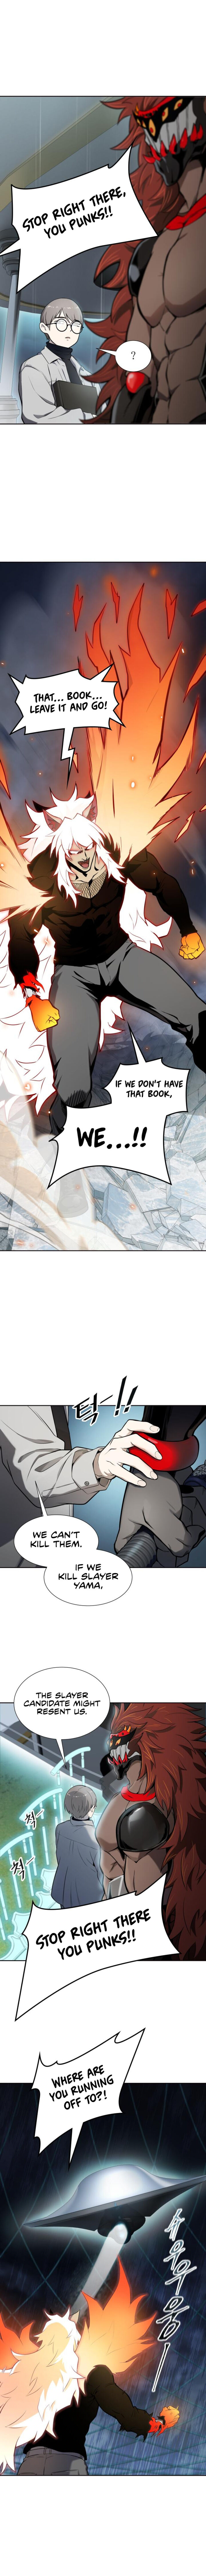 Tower Of God 586 13